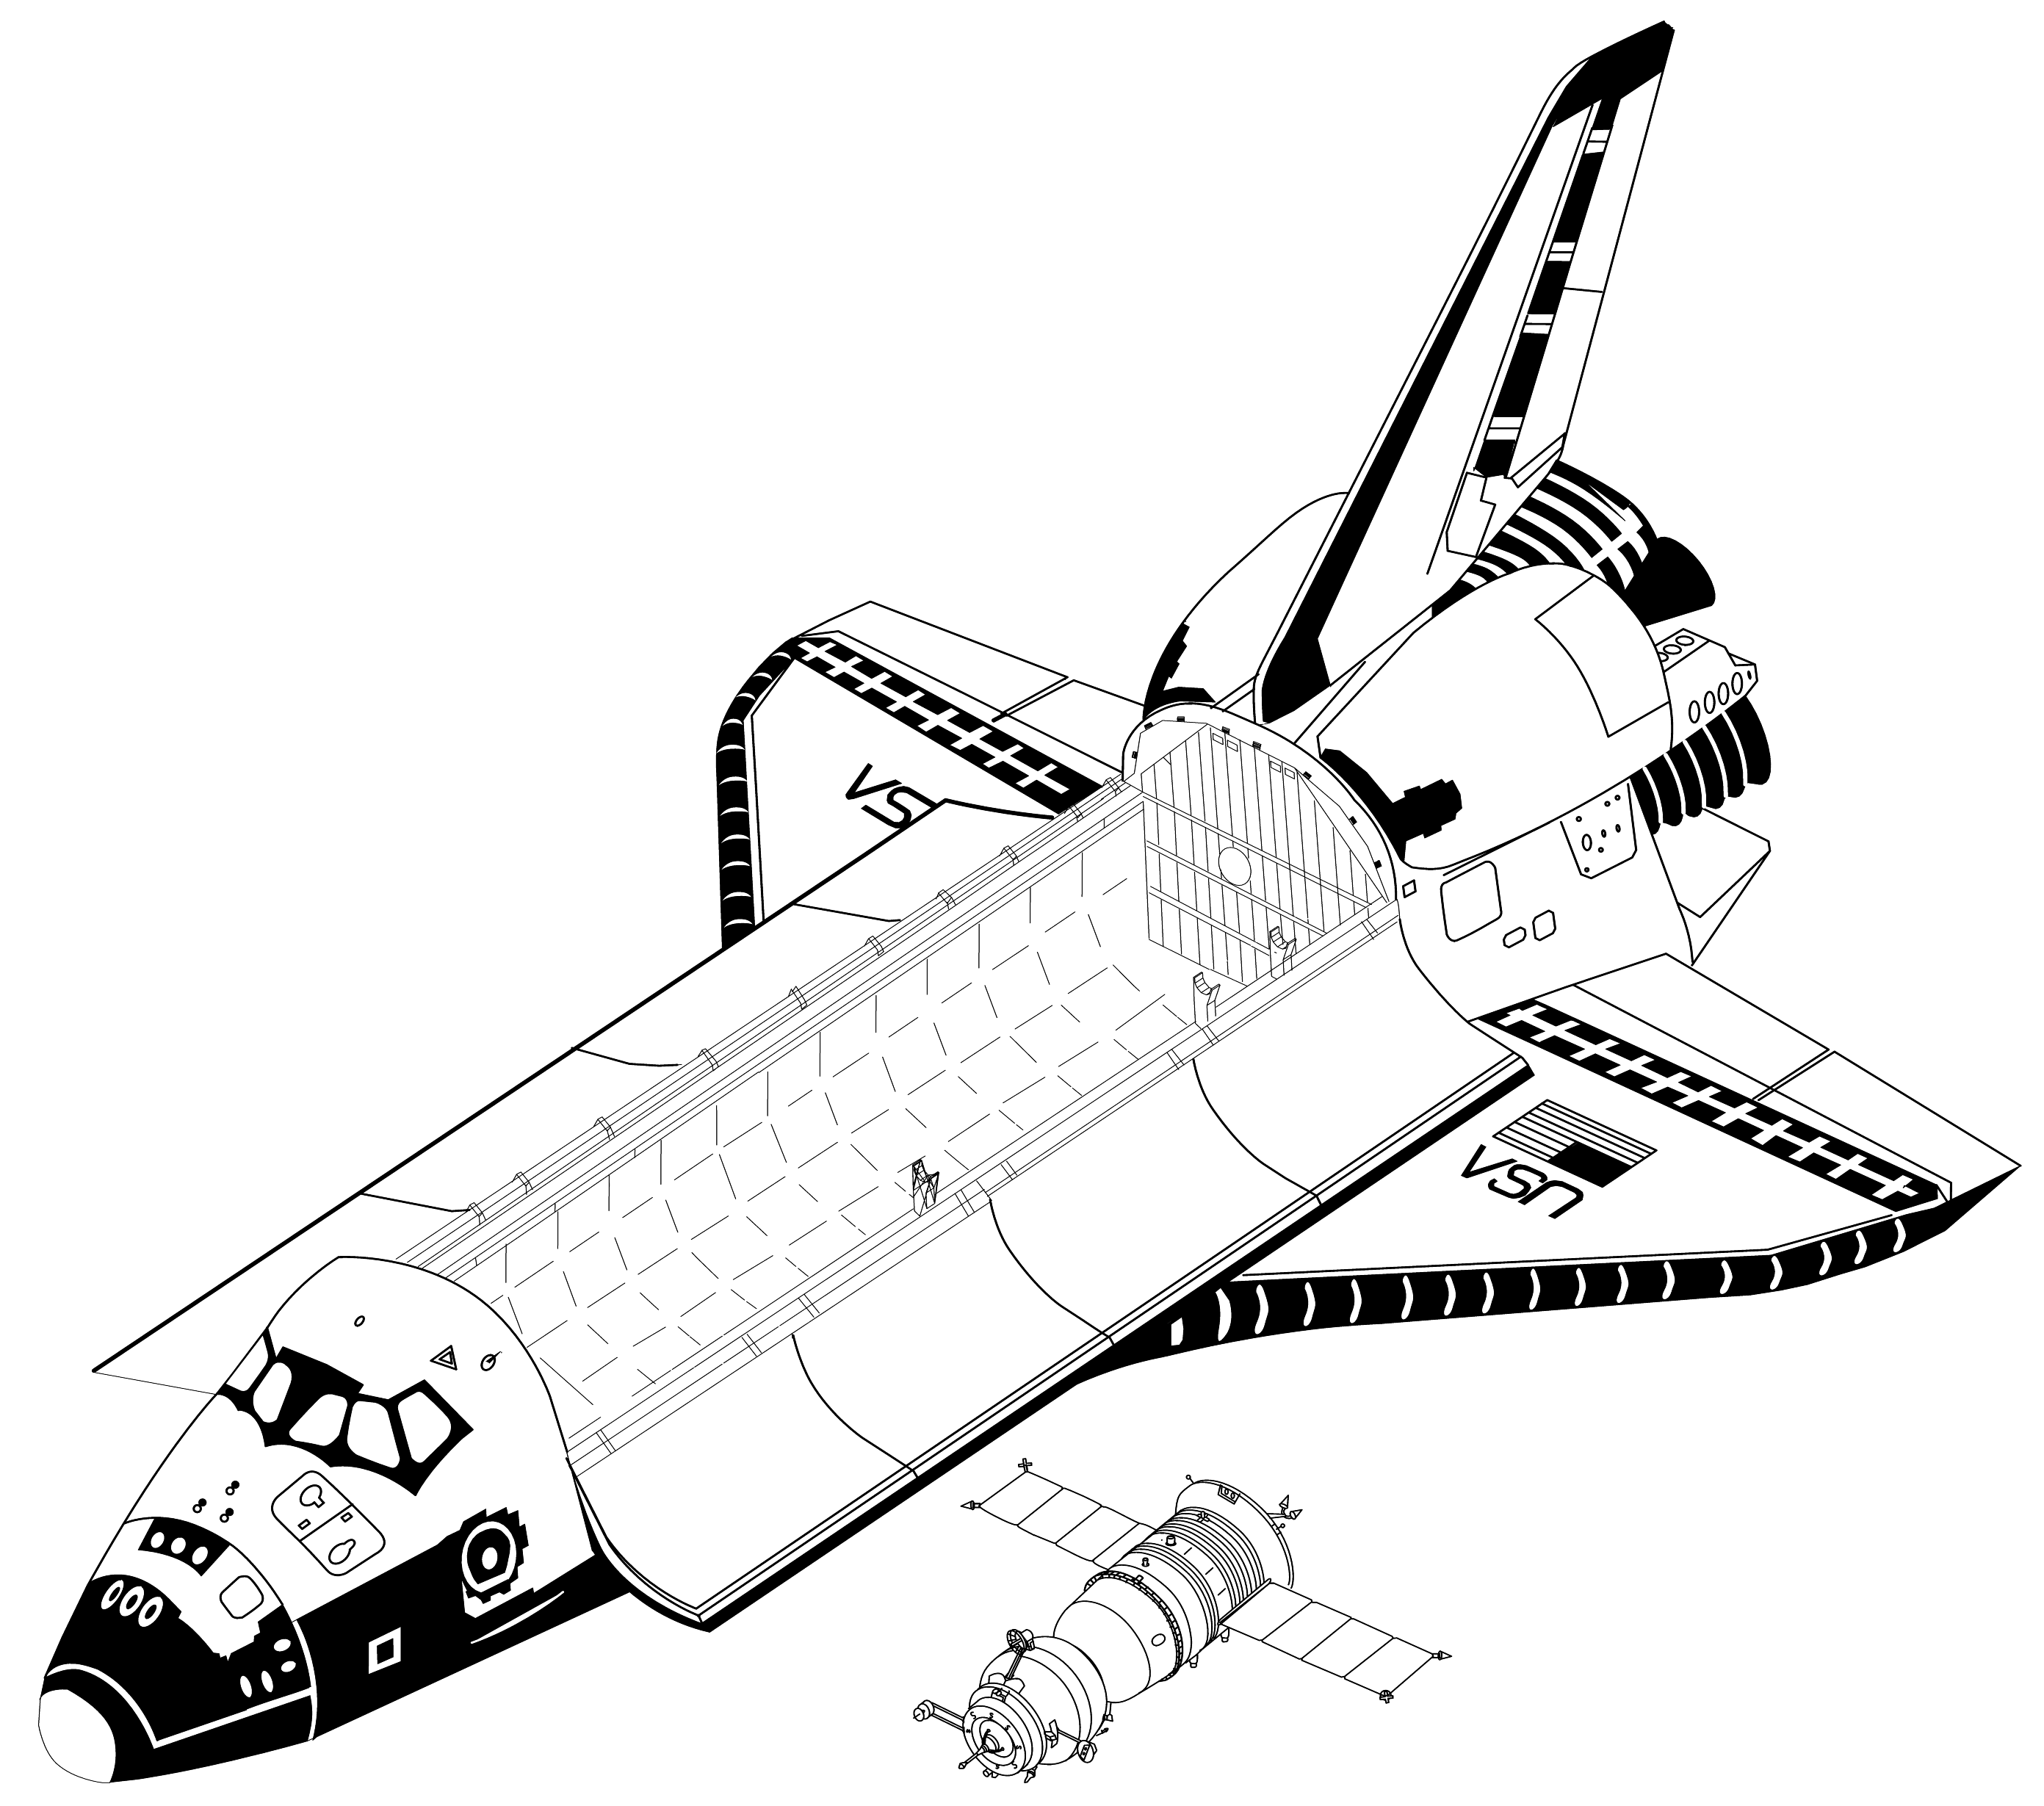 File:Space Shuttle vs Soyuz TM - to scale drawing.png - Wikimedia ...